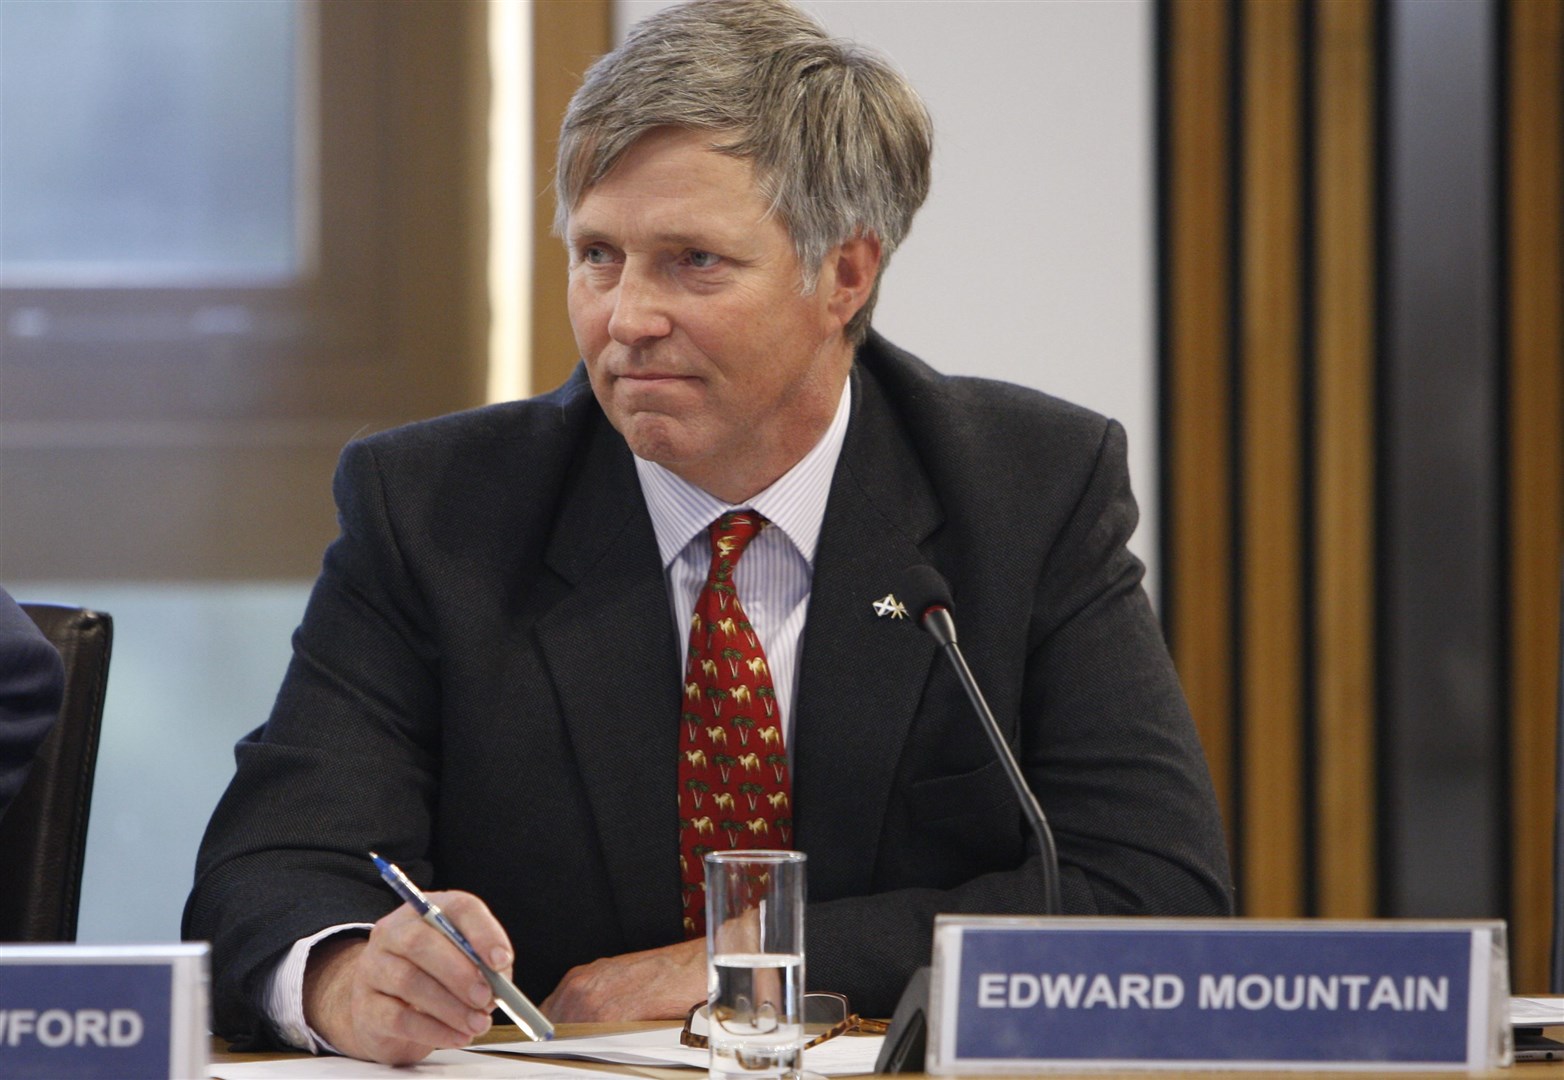 Edward Mountain MSP (Scottish Conservatives) raised concerns at First Minister's Questions